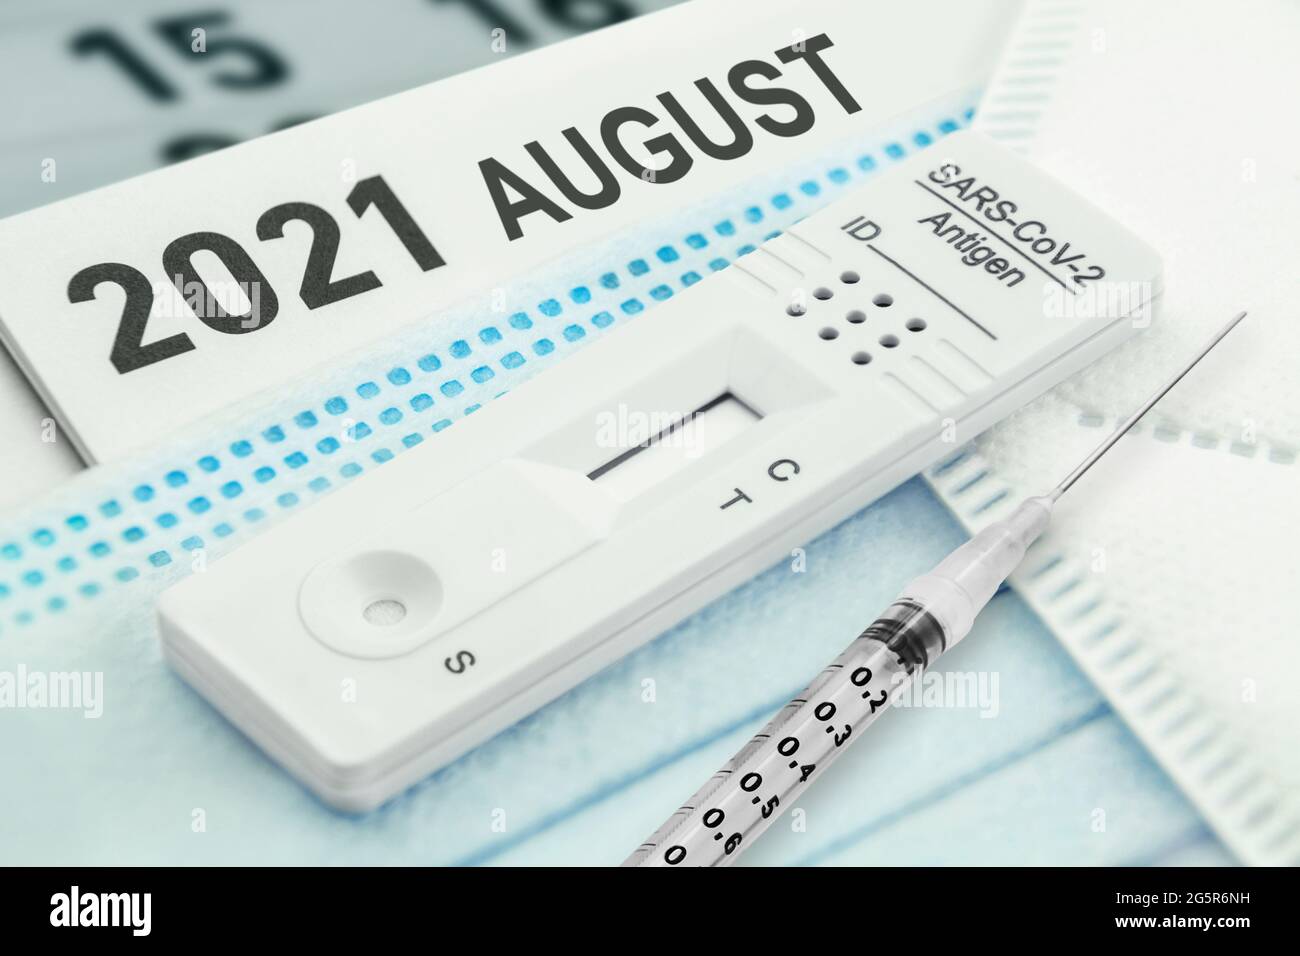 Calendar August 2021 Corona Rapid Test and Masks with Vaccination Stock Photo